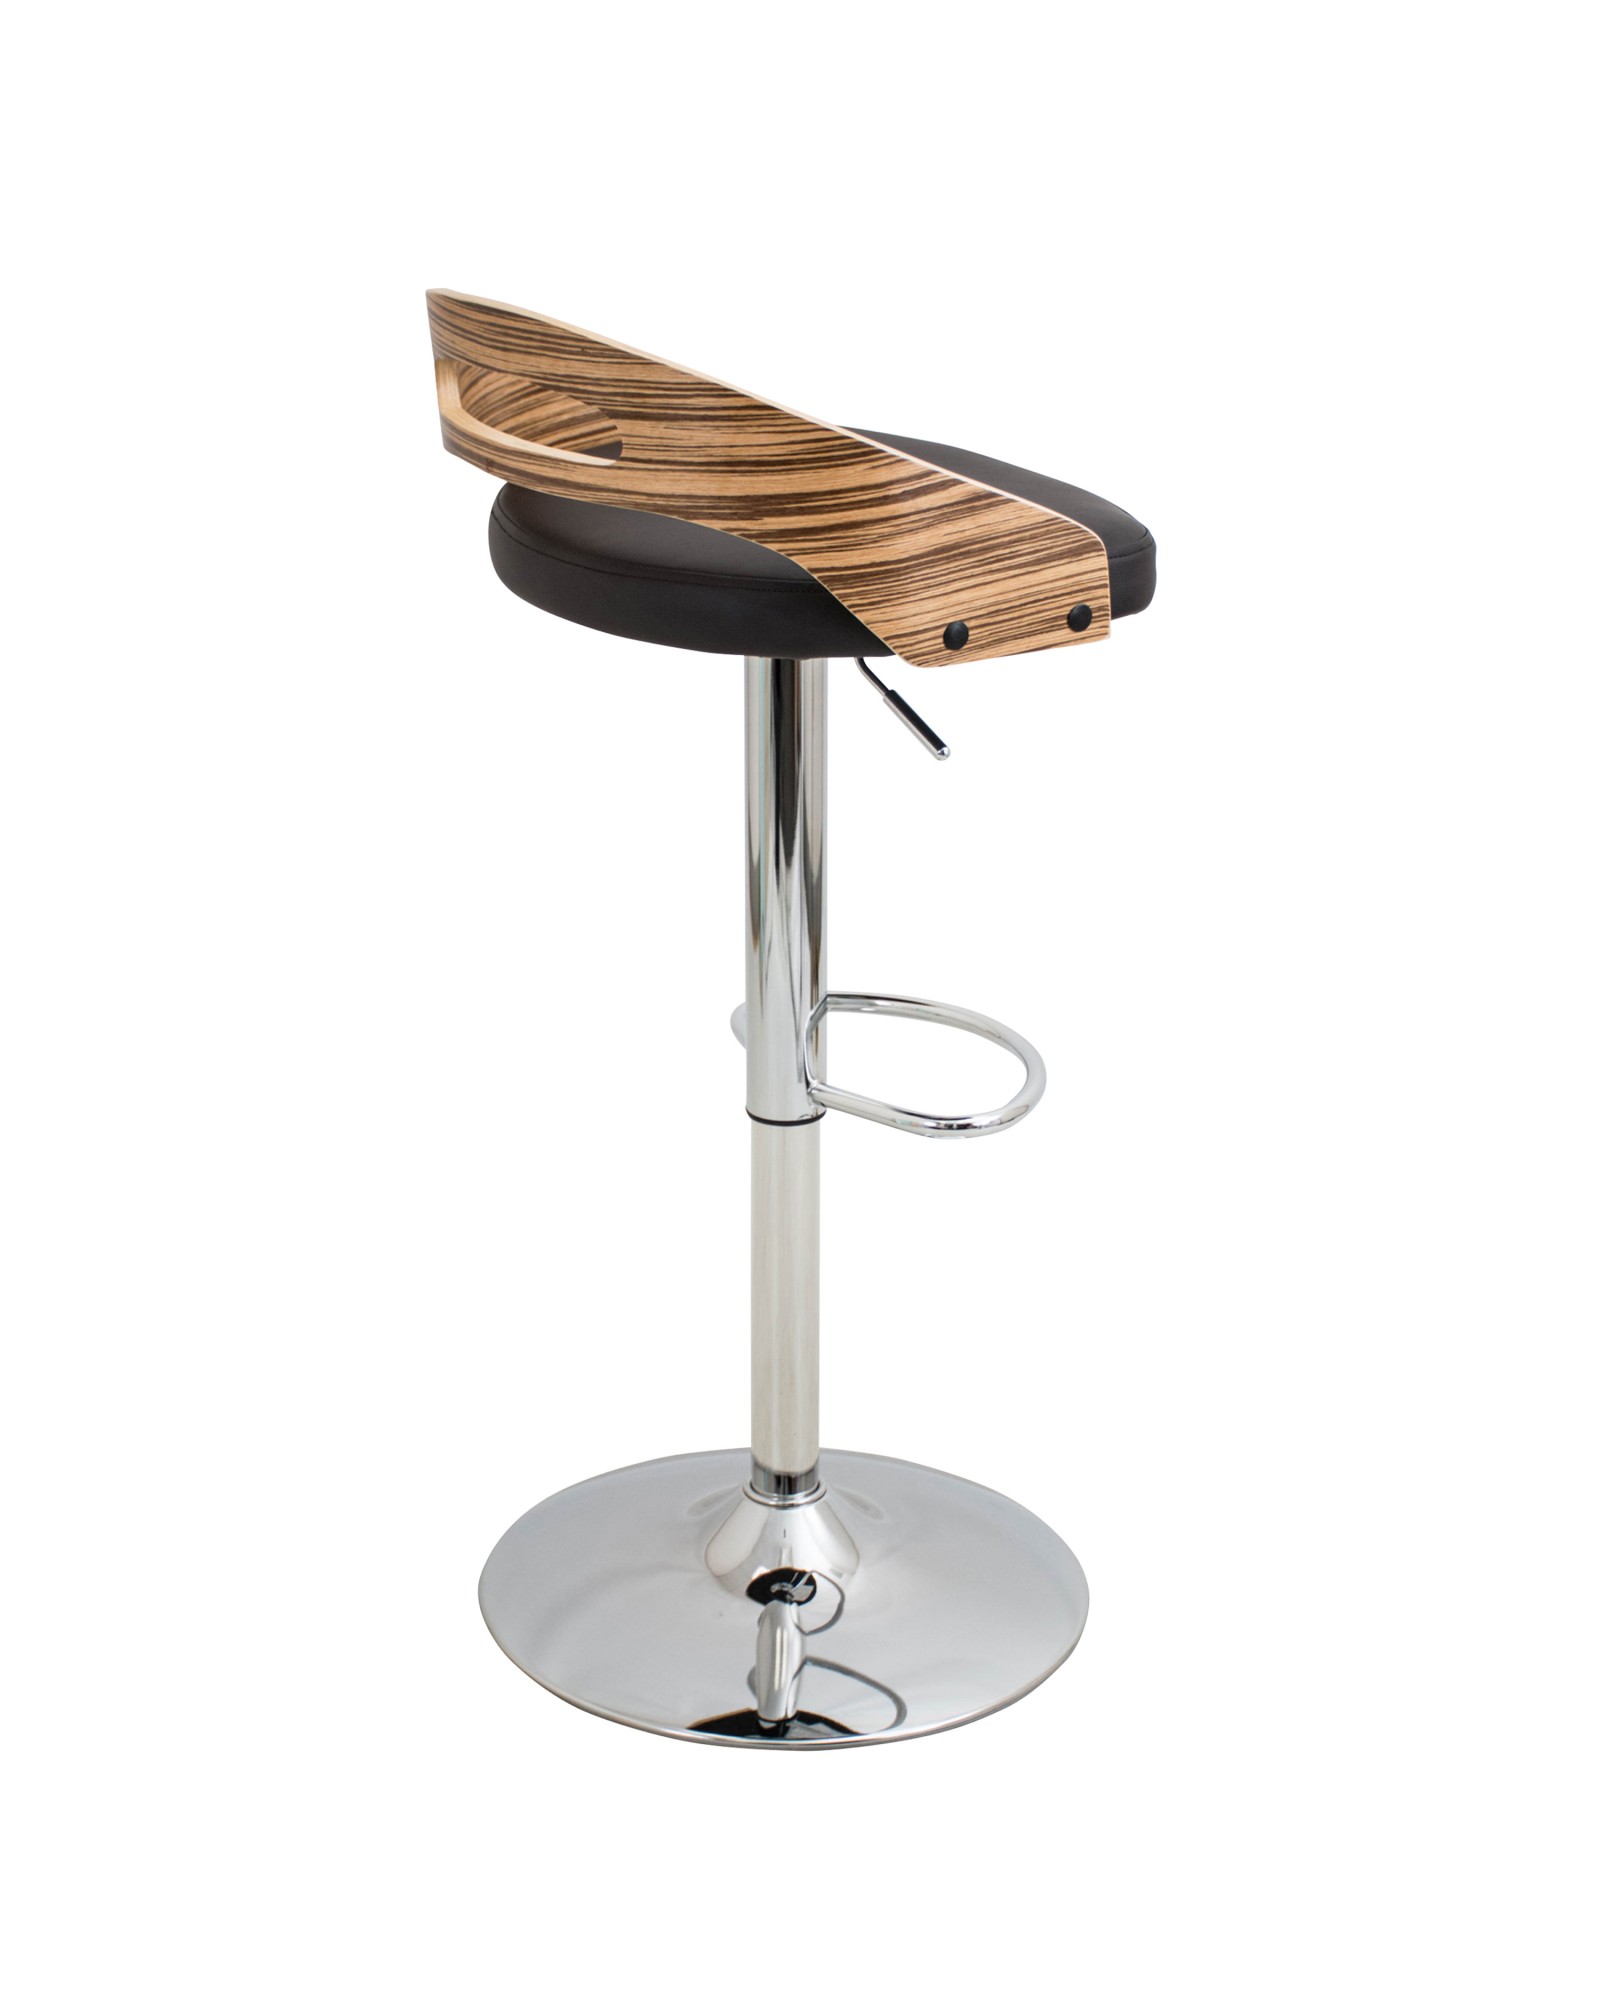 Cassis Mid-Century Modern Adjustable Barstool with Swivel in Zebra and Brown Faux Leather